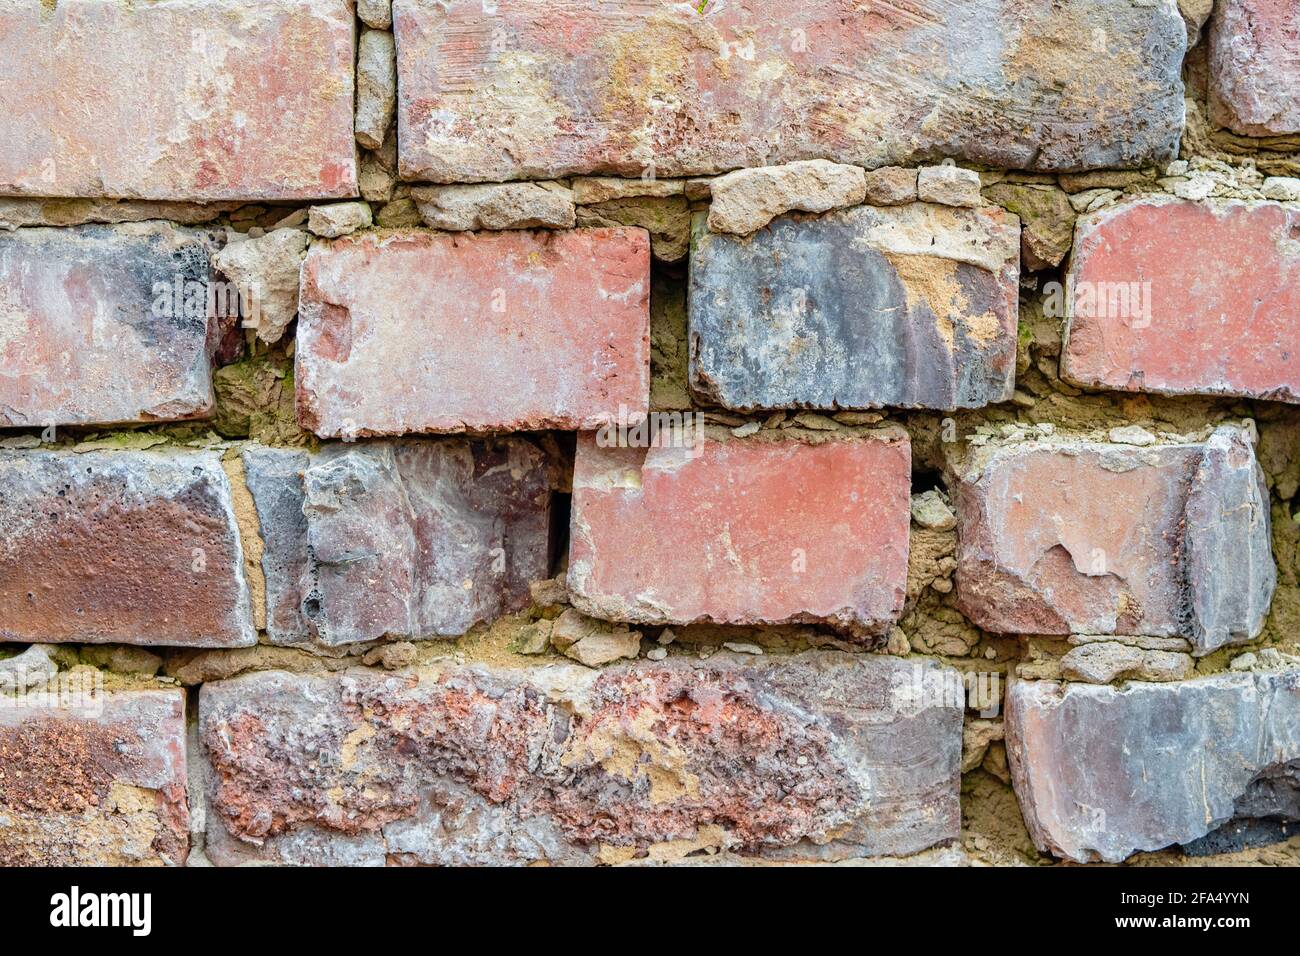 The old brickwork is made of fragments of red building bricks and holes in the seams. Background image Stock Photo